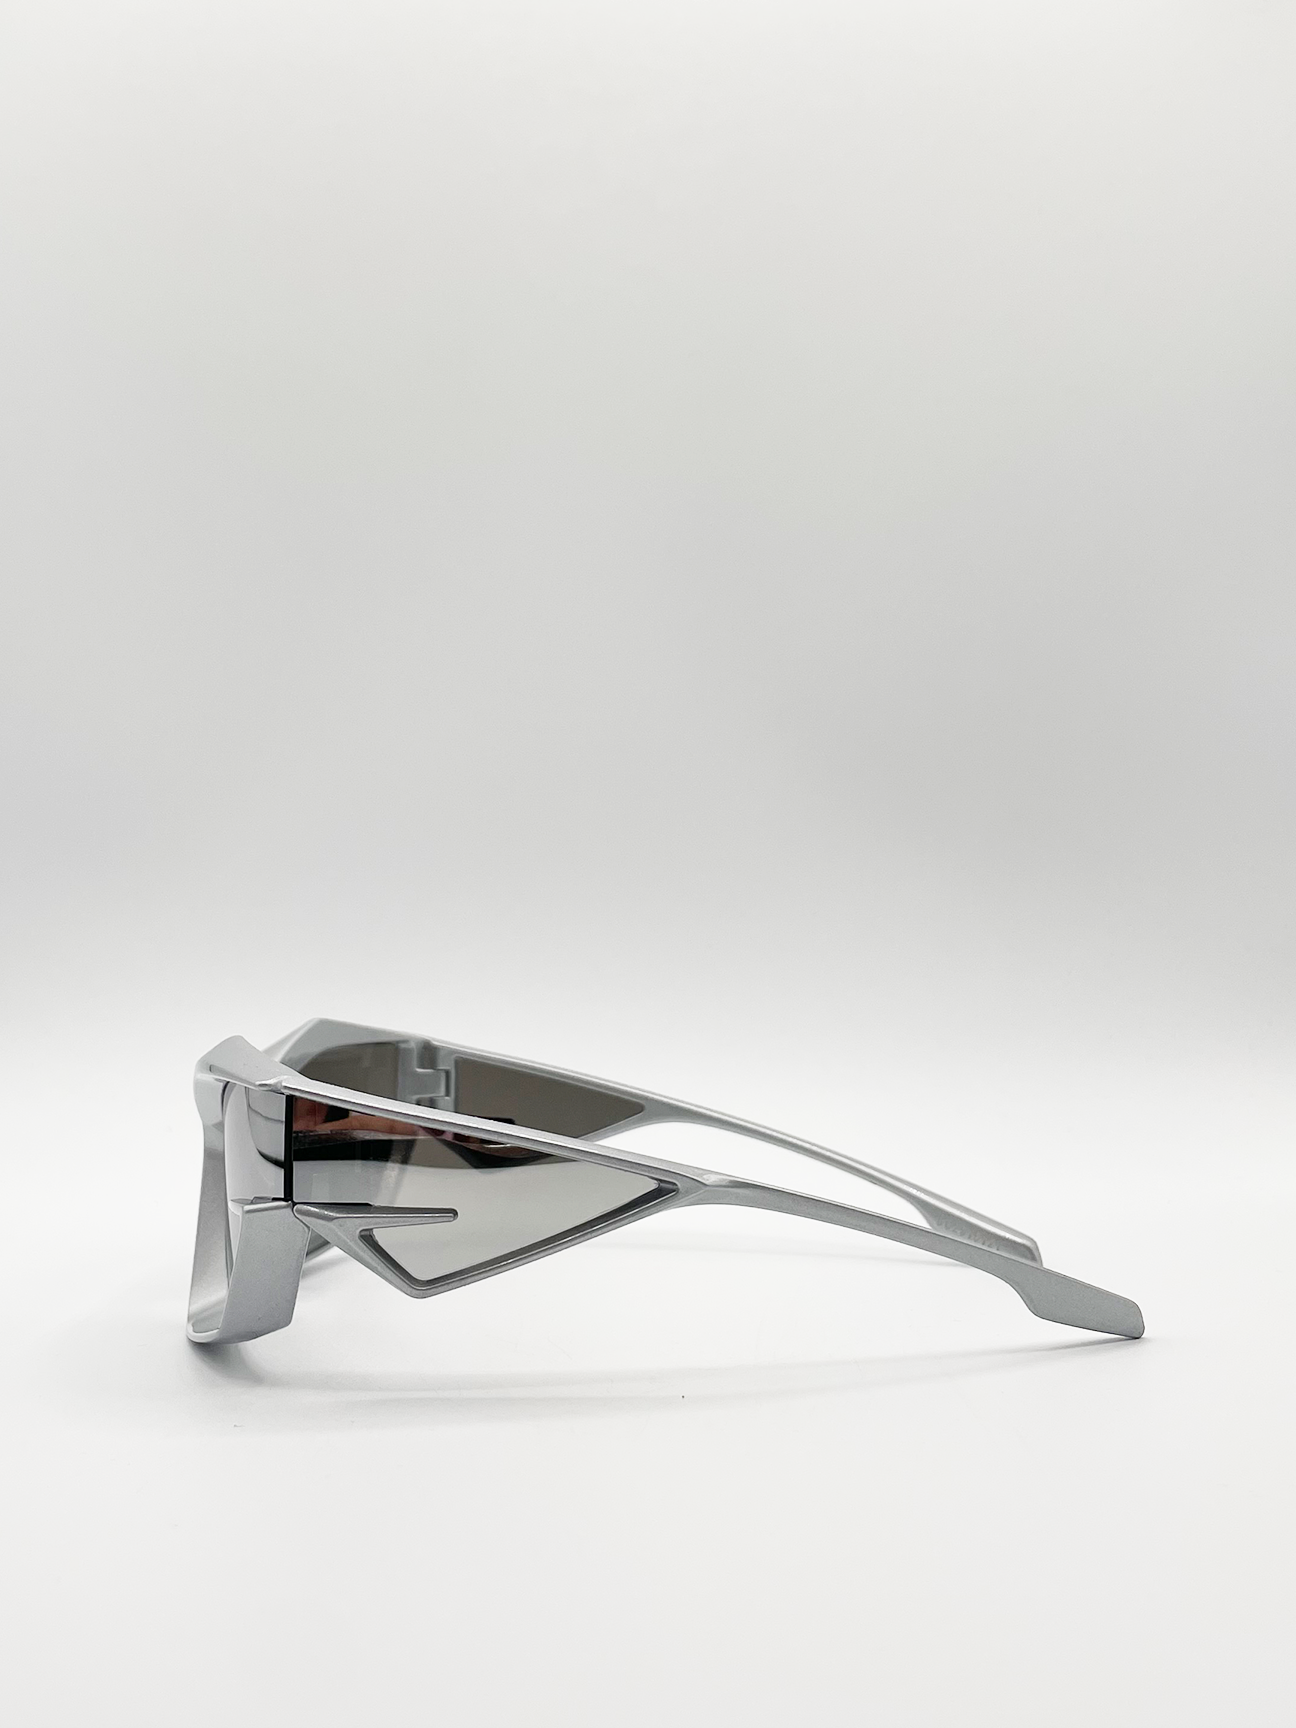 Racer style sunglasses in silver